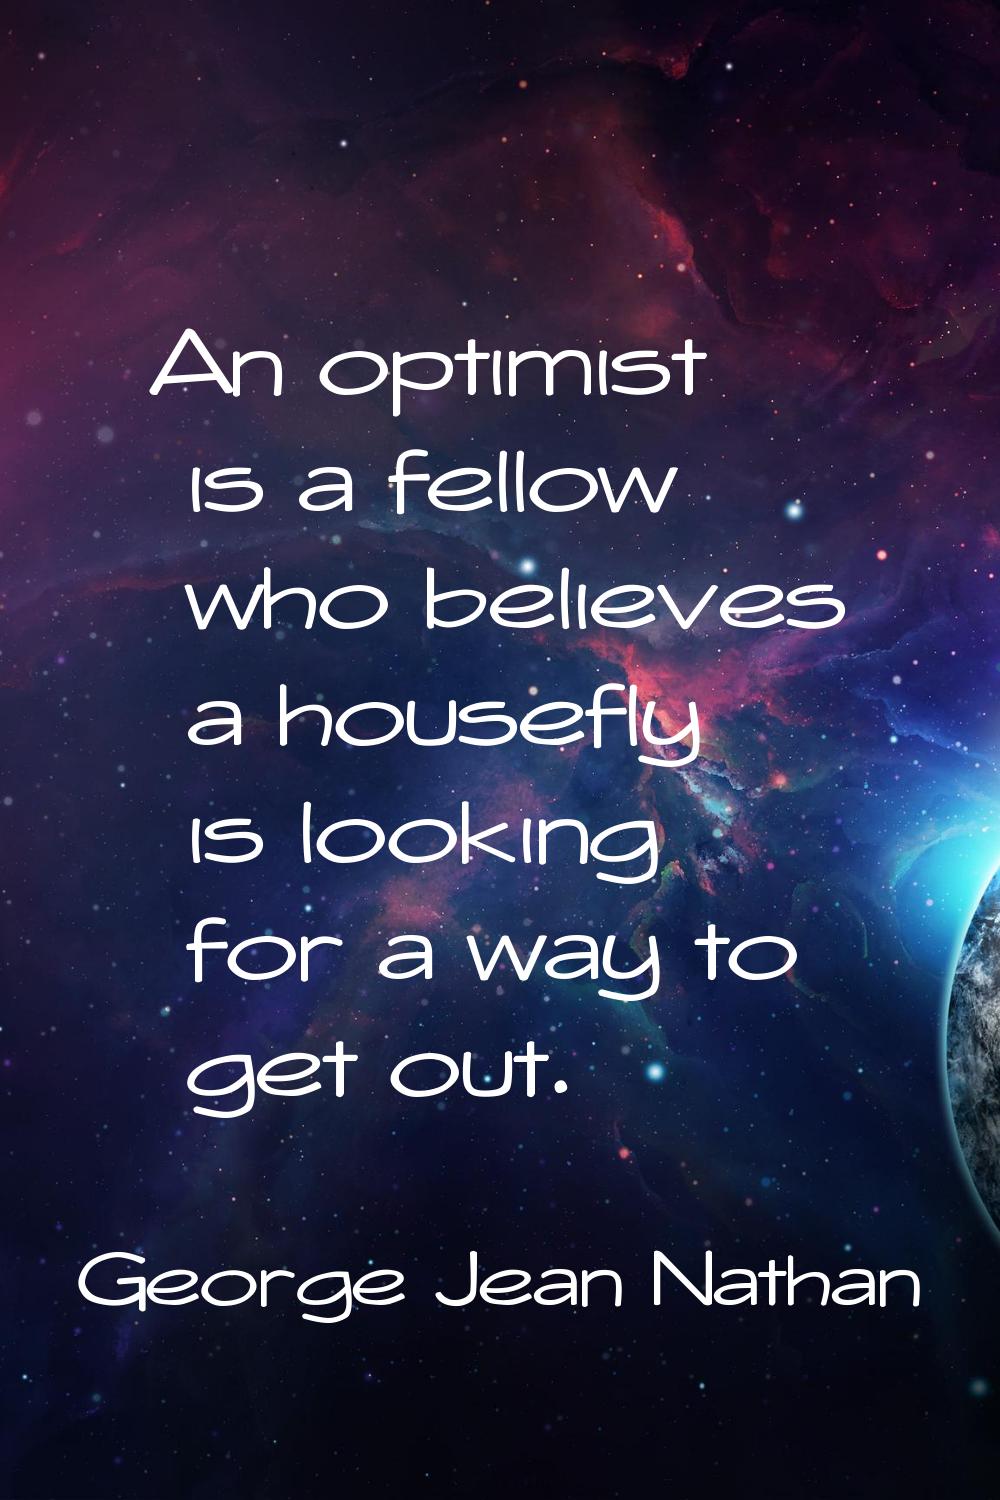 An optimist is a fellow who believes a housefly is looking for a way to get out.